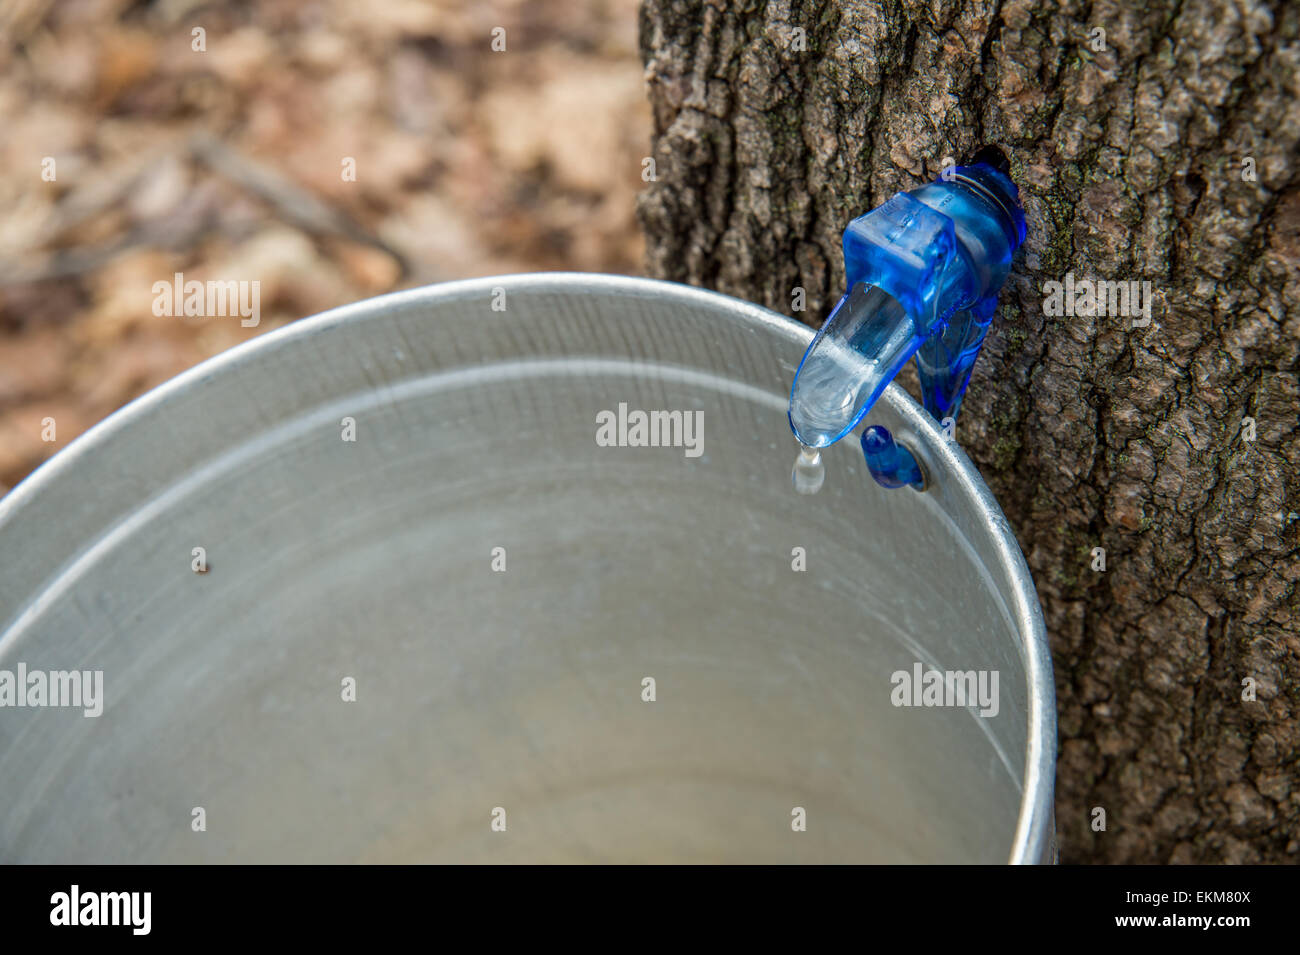 Maple Sap Dripping into a Bucket Stock Photo